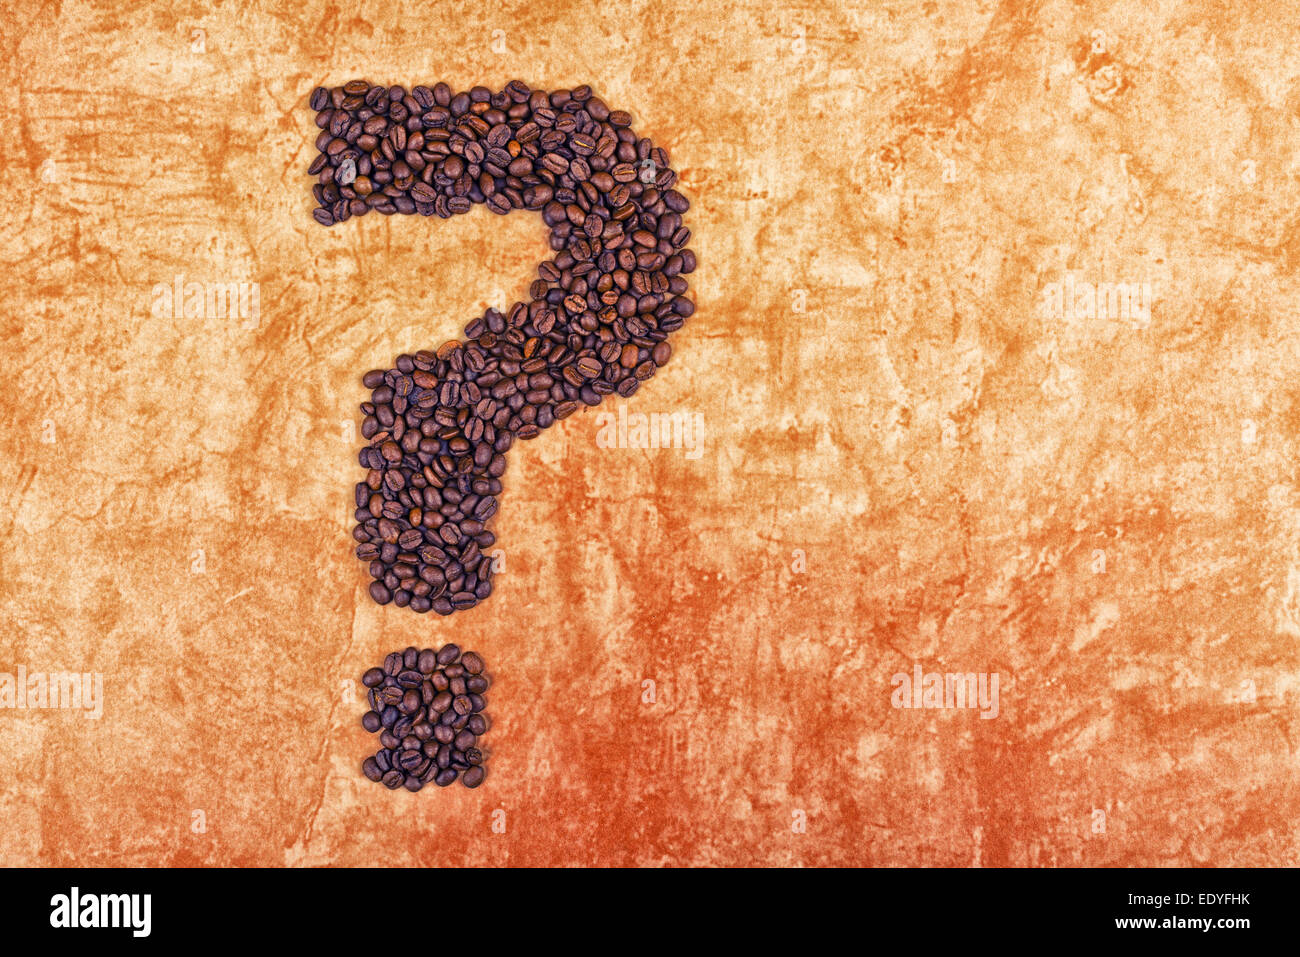 Question Mark made of Roasted Coffee Beans on grunge Background. Stock Photo